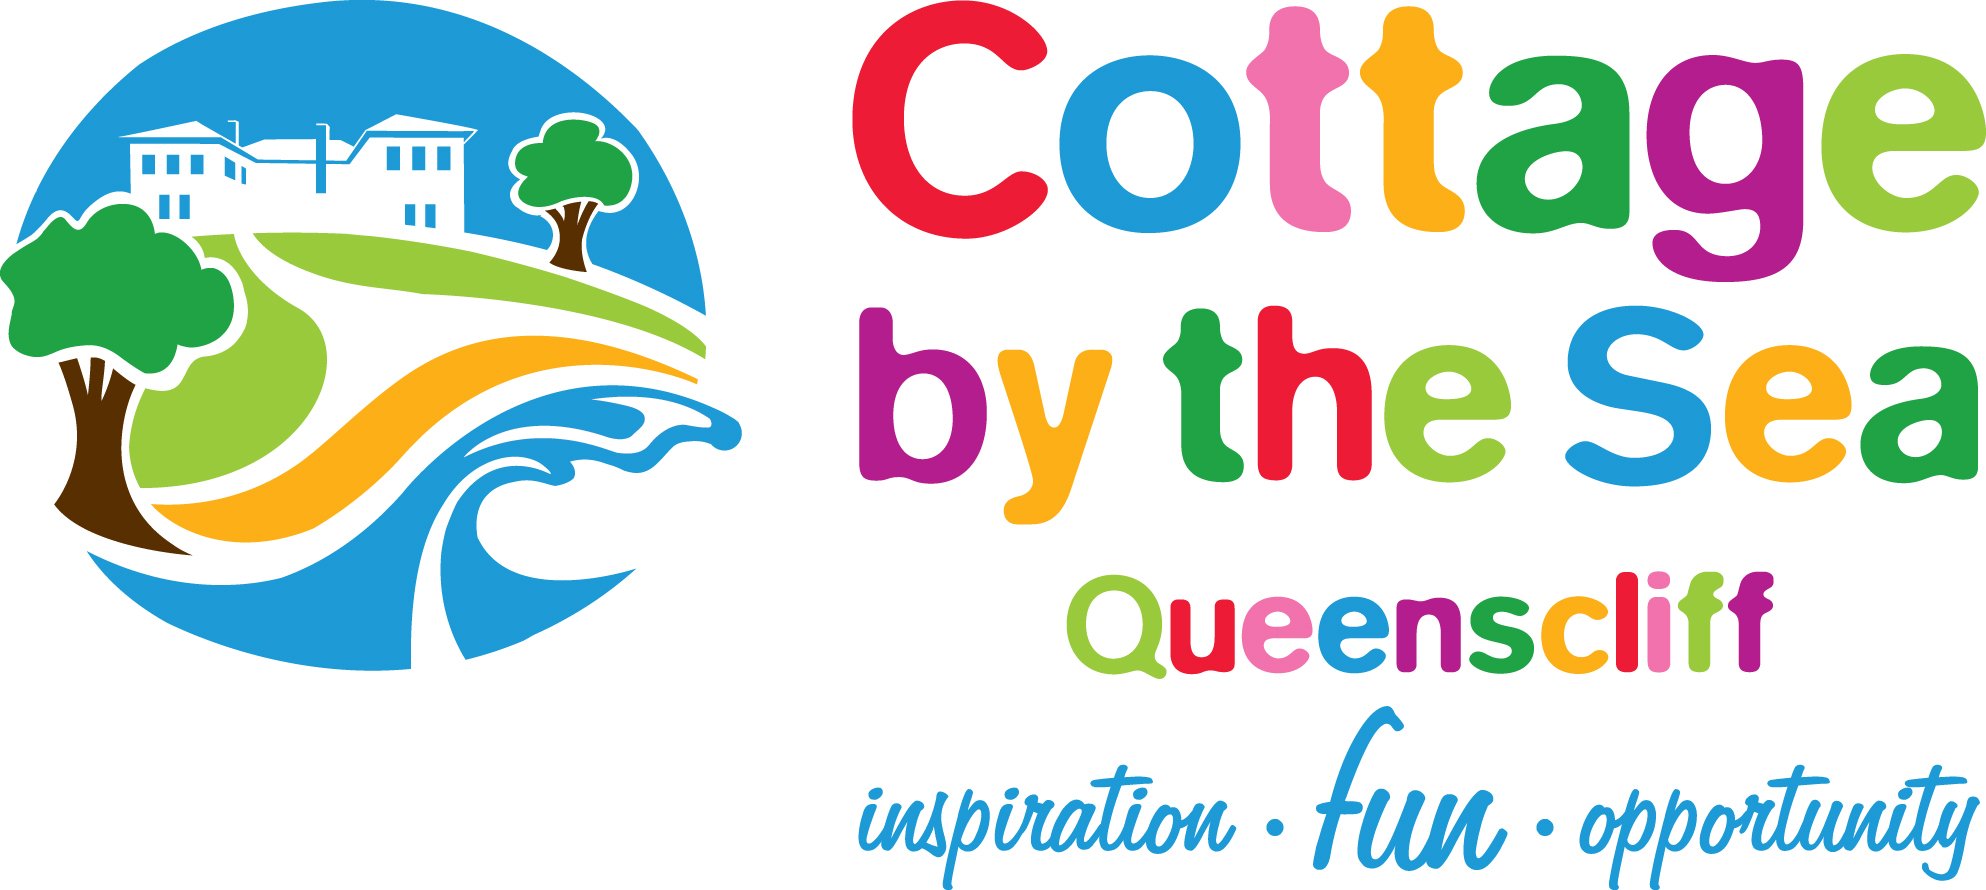 Cottage-by-the-Sea-Logo.jpg